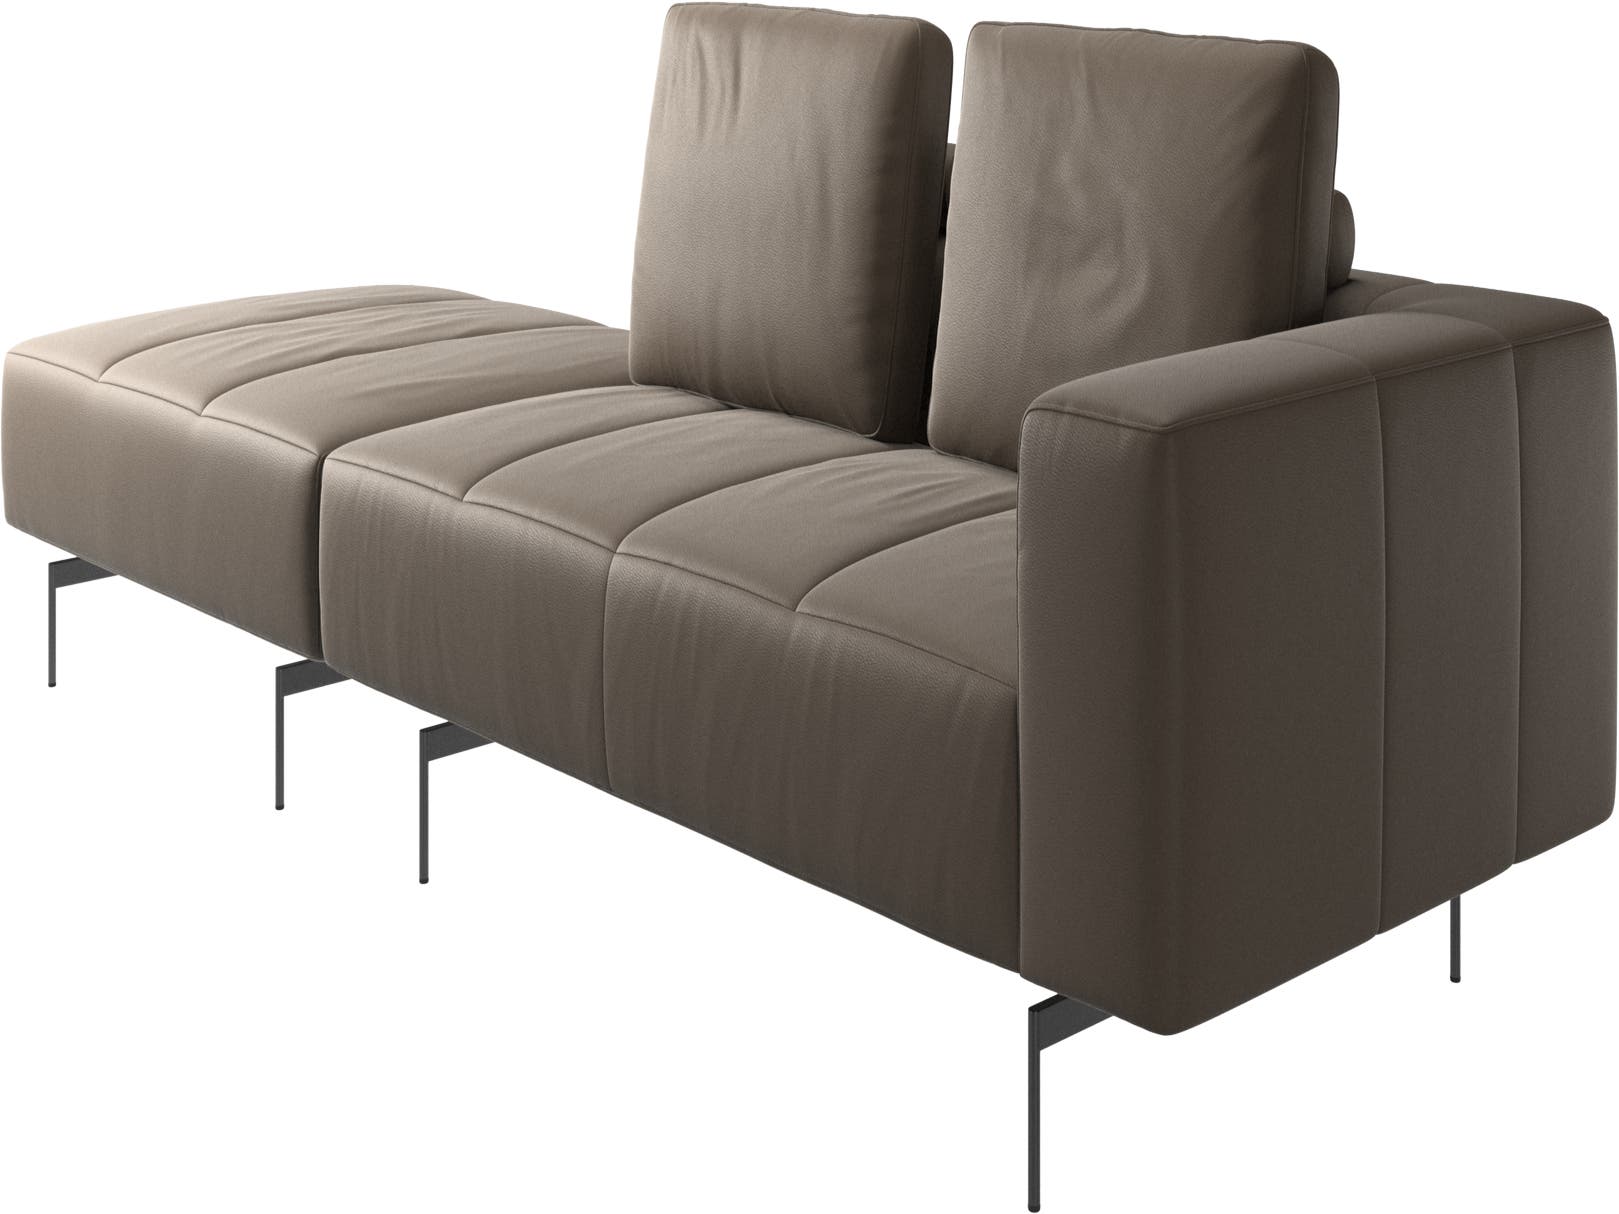 Amsterdam sofa with pouf on right side | BoConcept